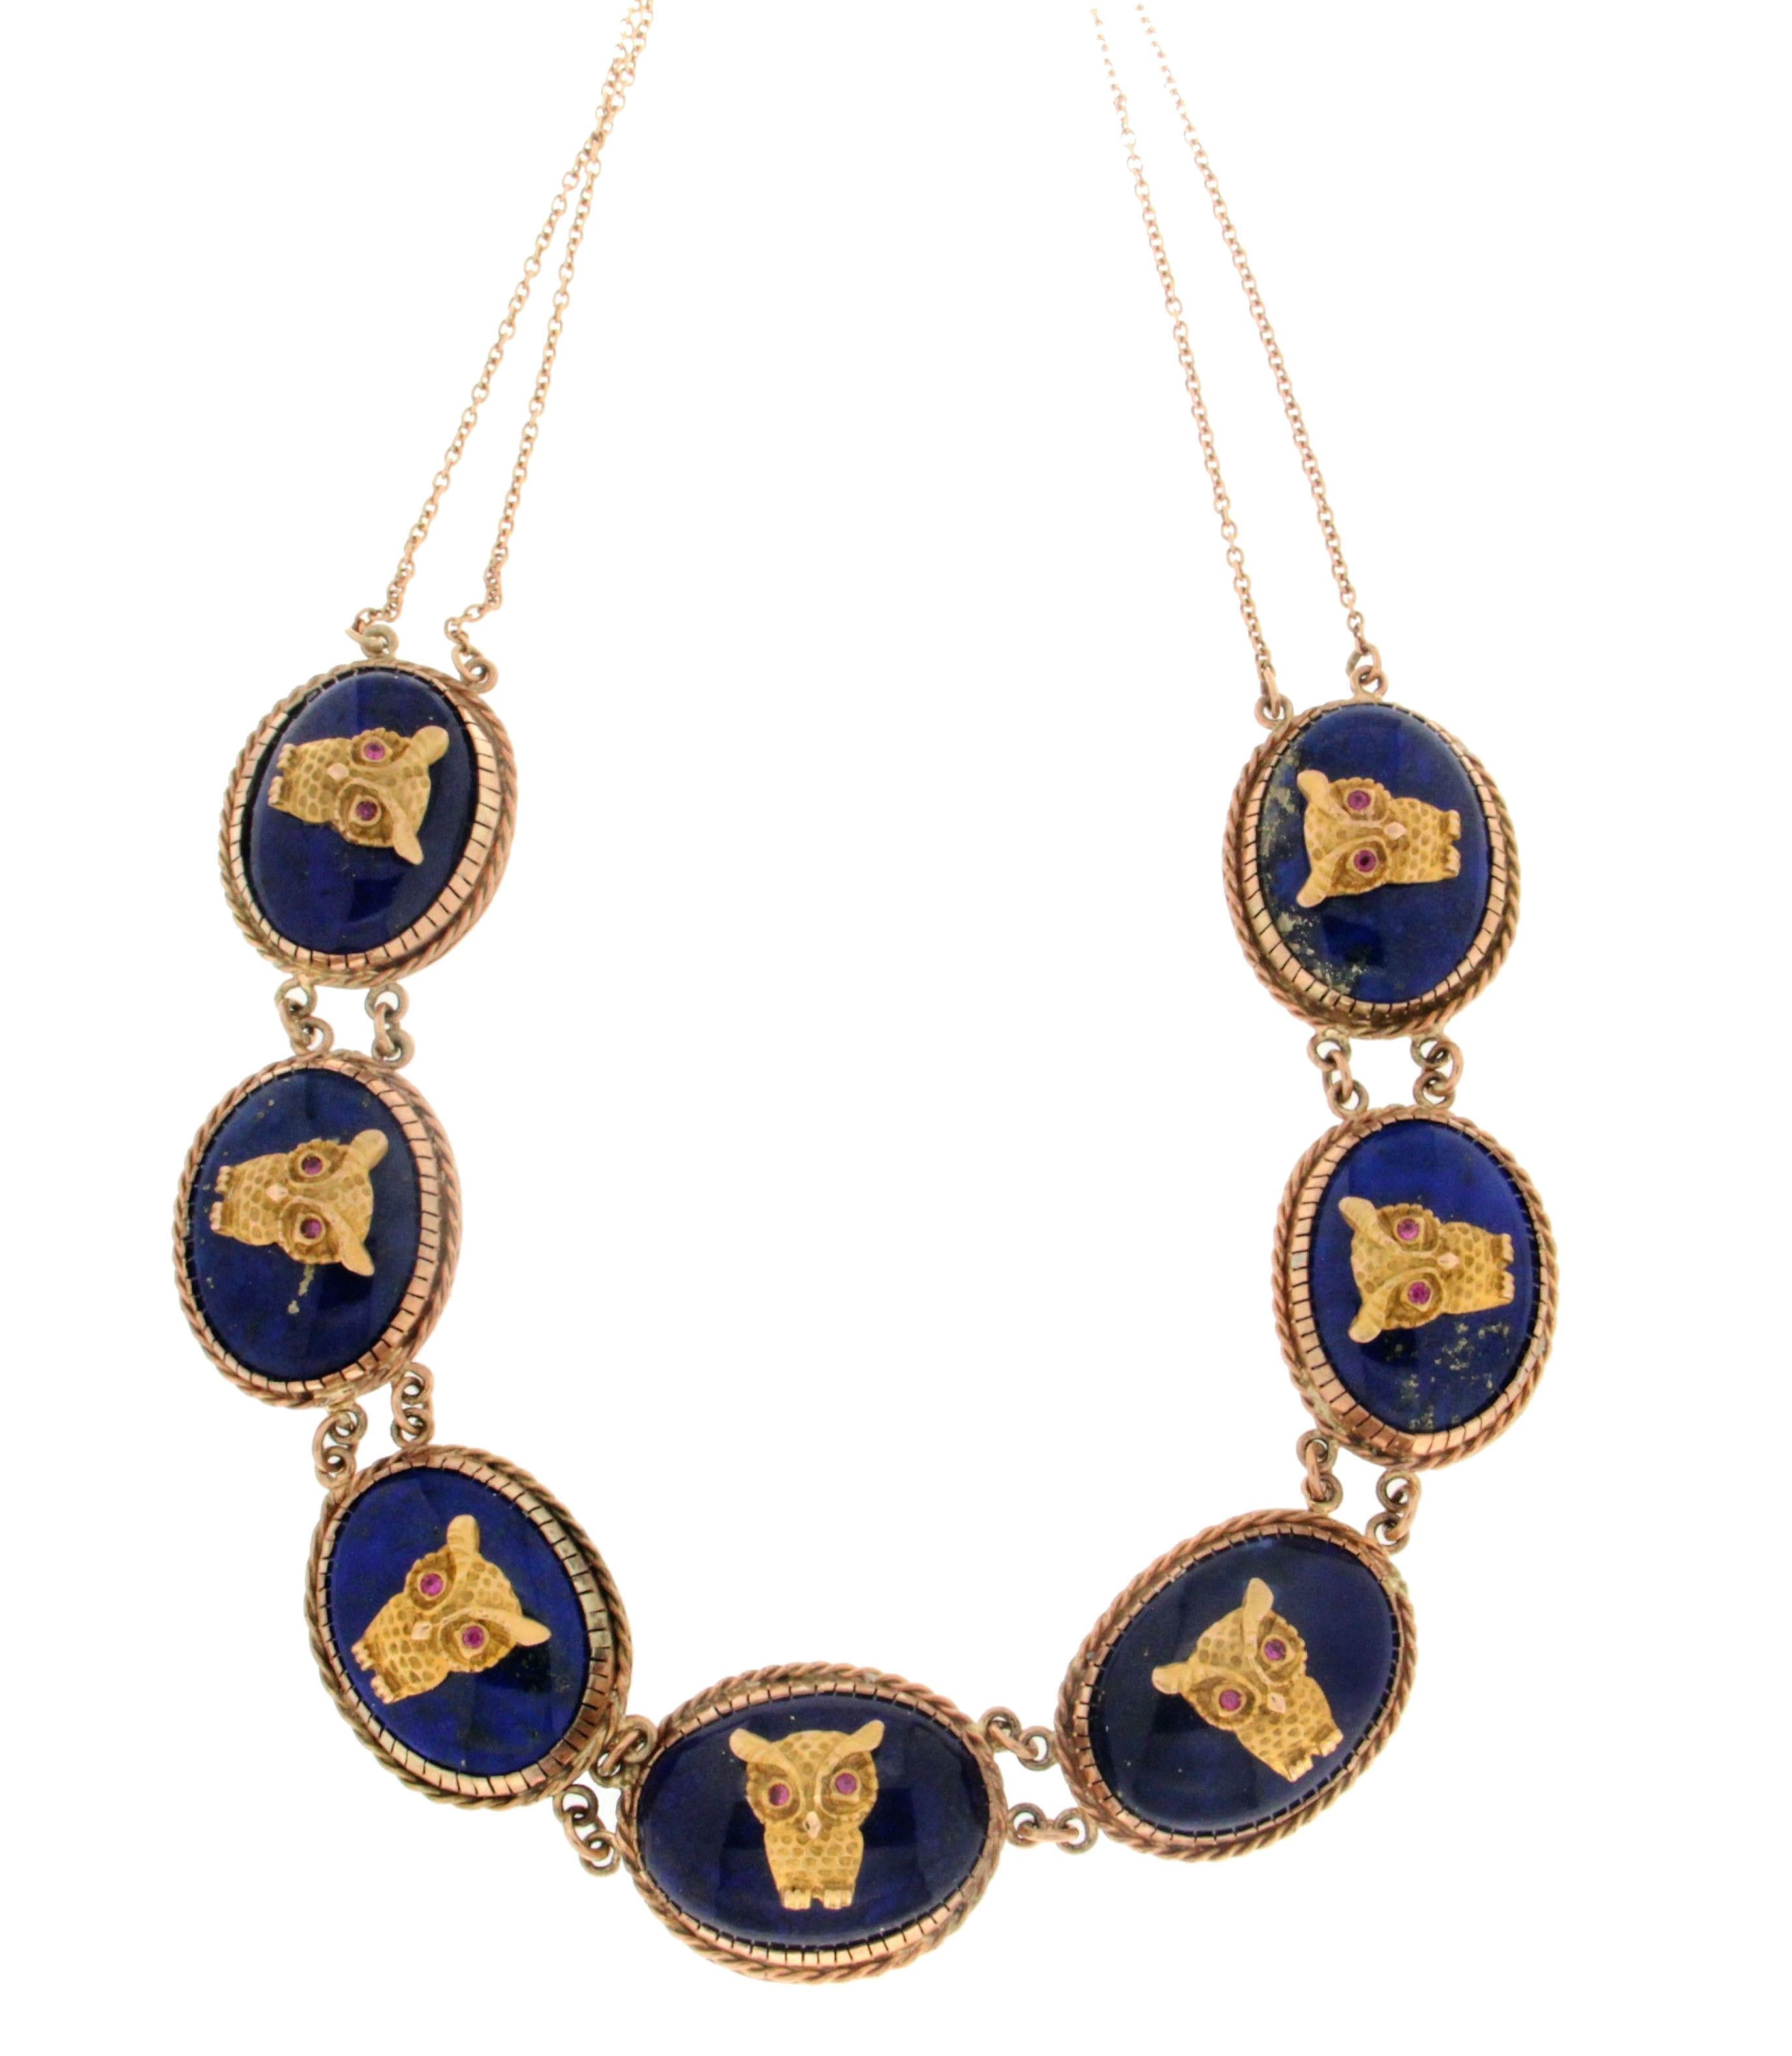 Lapis owls 9 karat yellow gold,rubies in the eyes,choker necklace

Necklace total weight 64.80 grams 
Necklace length 43 cm